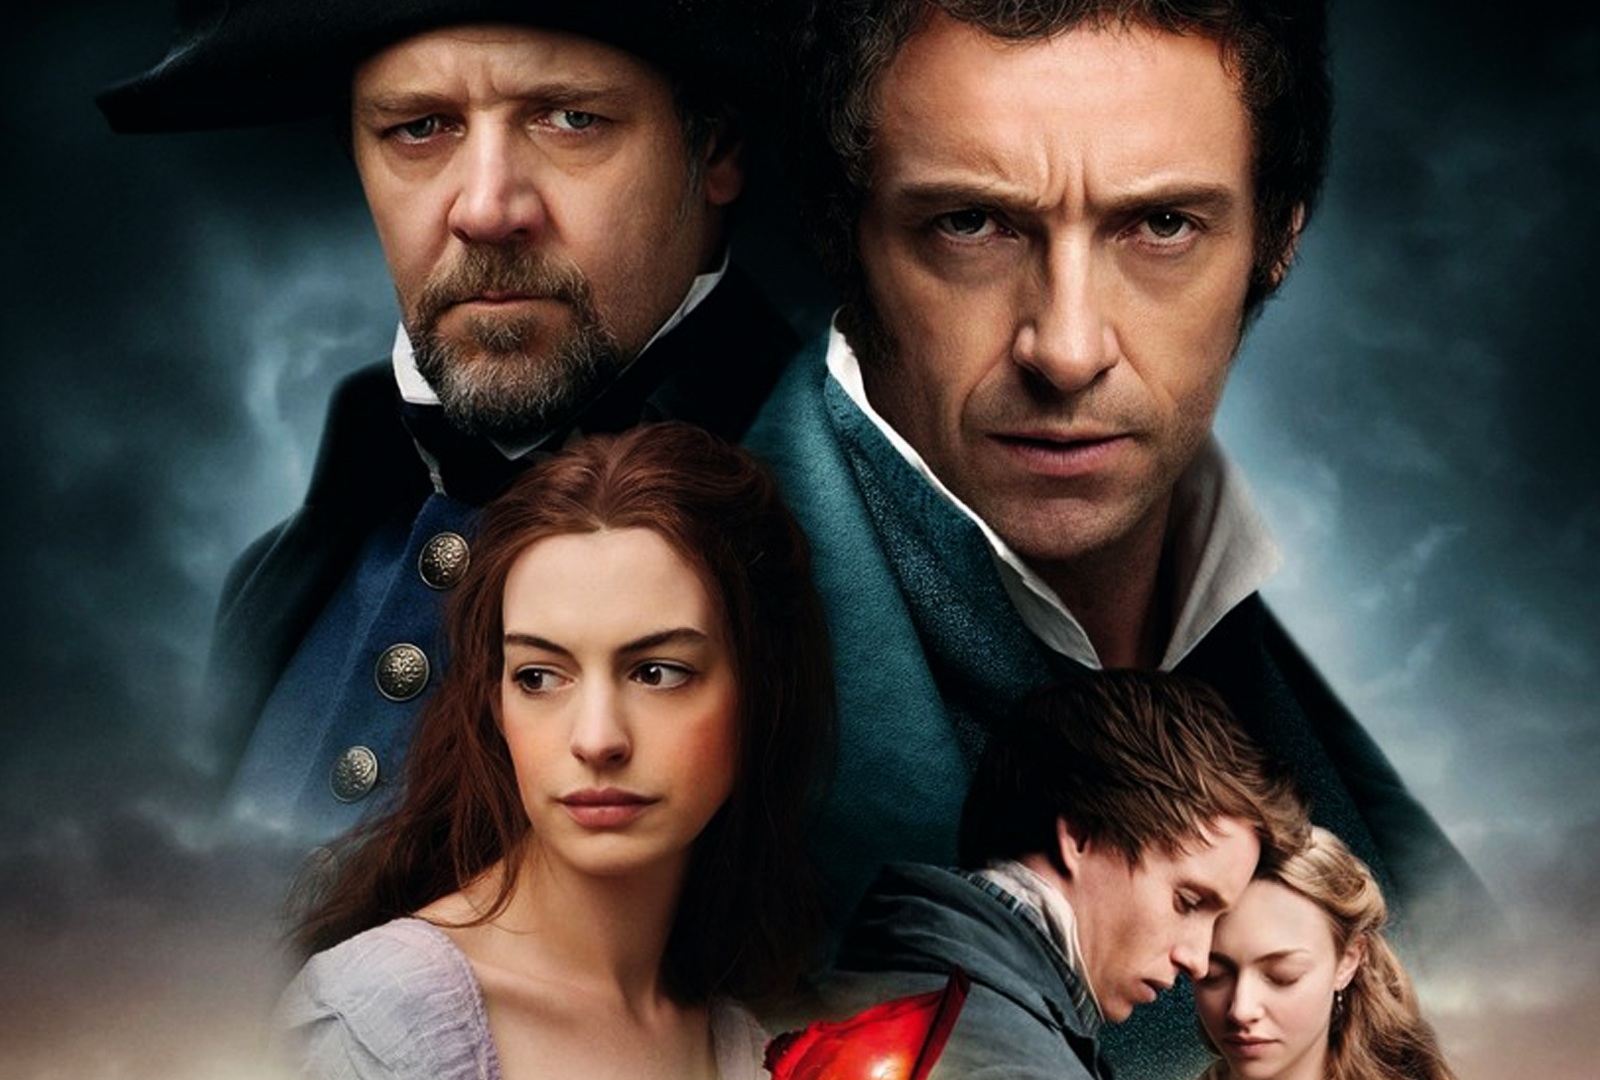 BSB Exclusive News! Les Miserables Futureshop Exclusive blu-ray Steelbook is coming in March